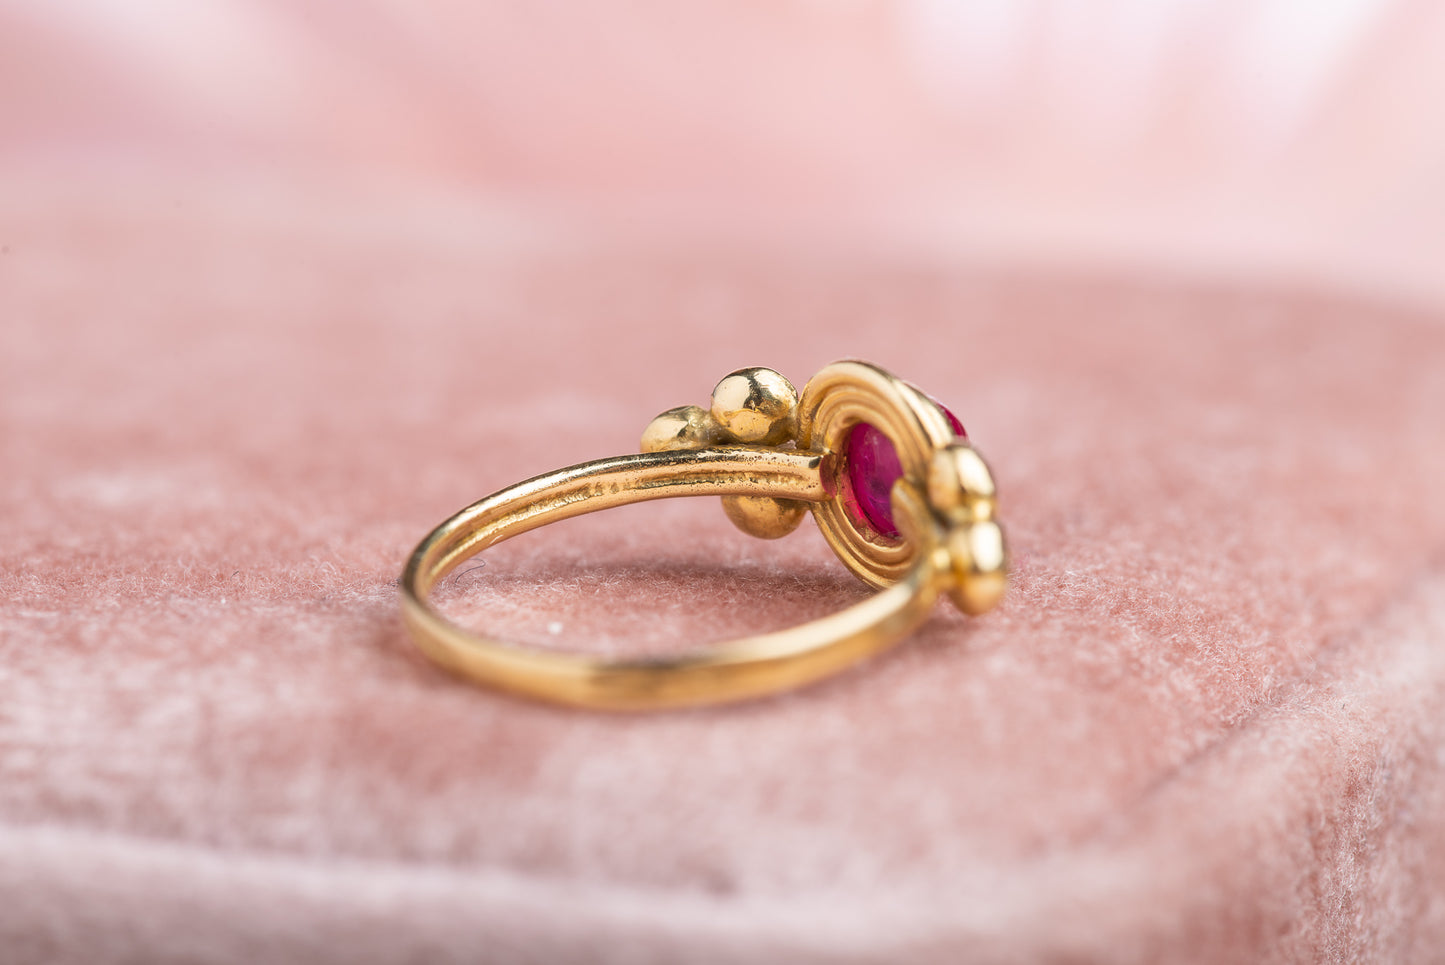 Exquisite Natural Ruby Cabochon Diamond Ring